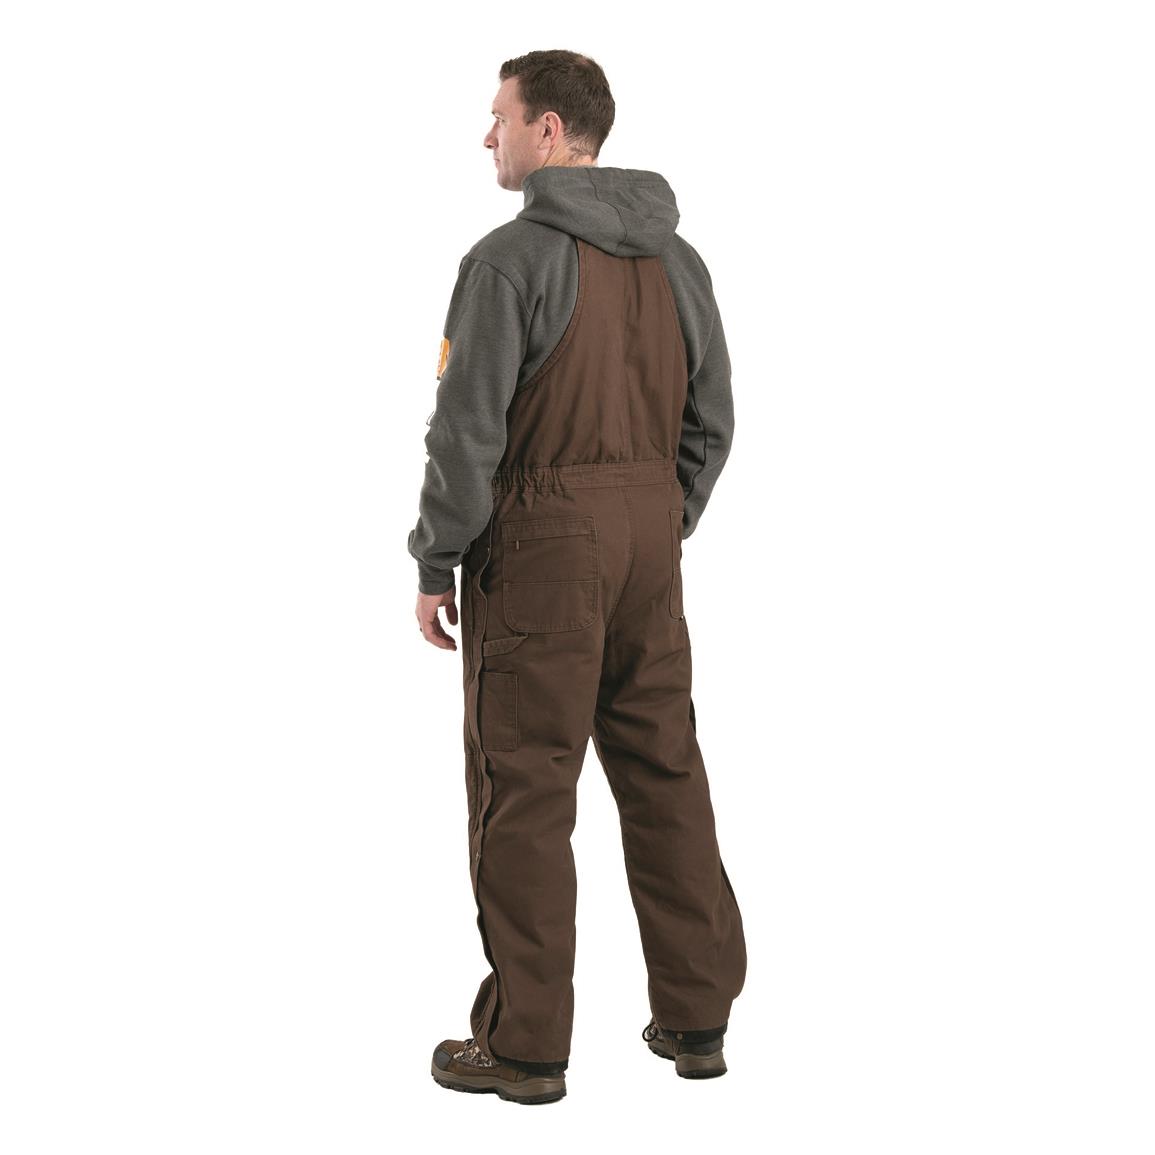 Simms Men's CX Fishing Bibs - 721968, Overalls & Coveralls at Sportsman's  Guide